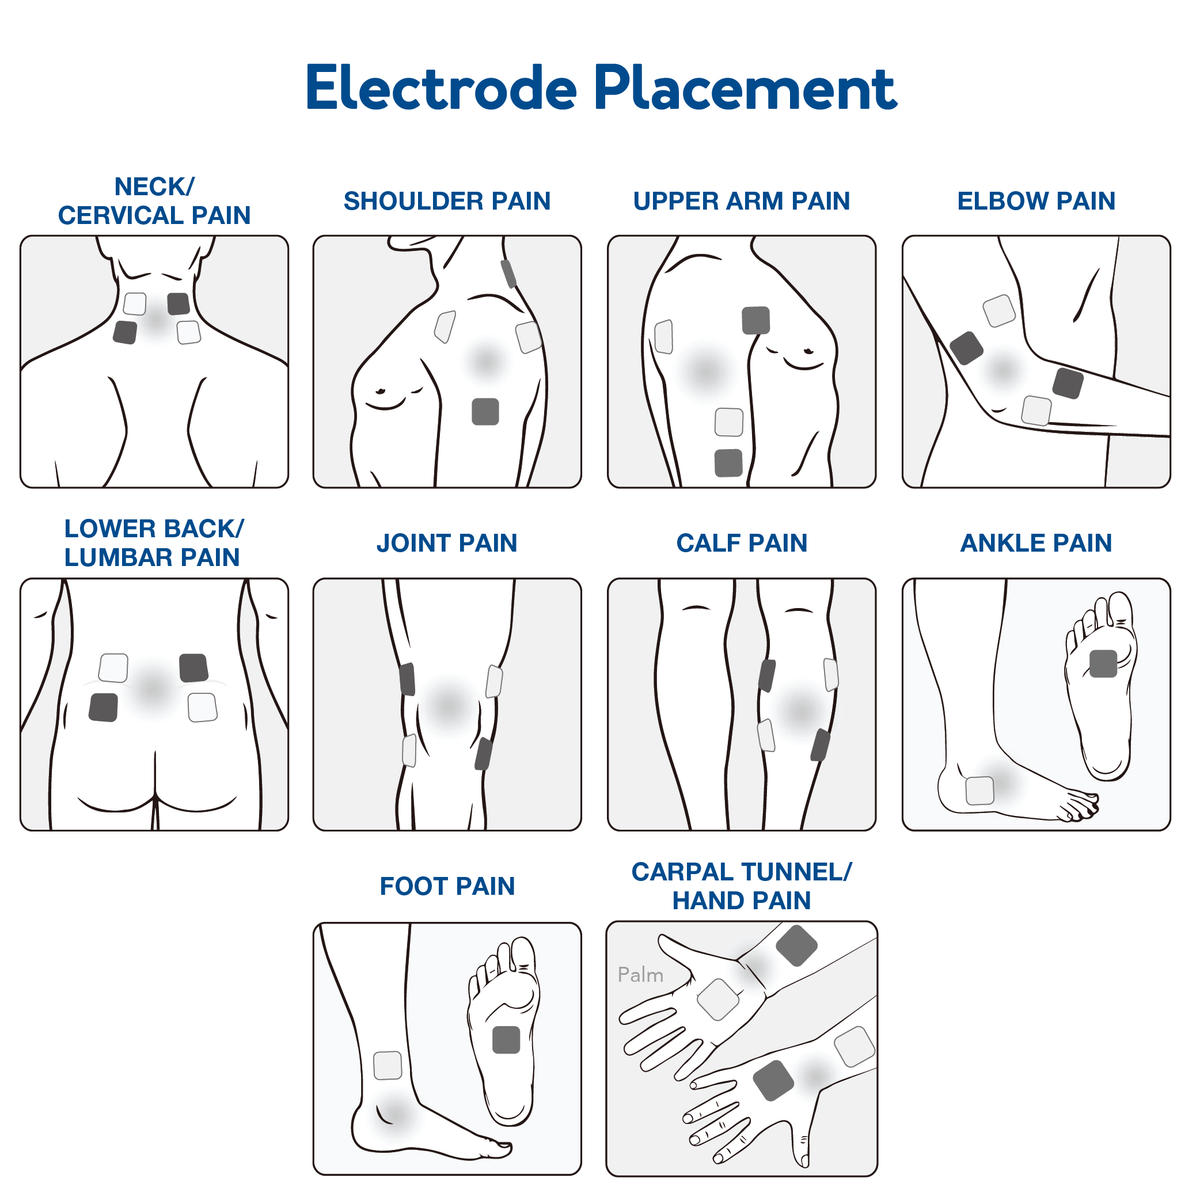 An electrode placement chart showing various positions for electrodes : Further details are provided next to image